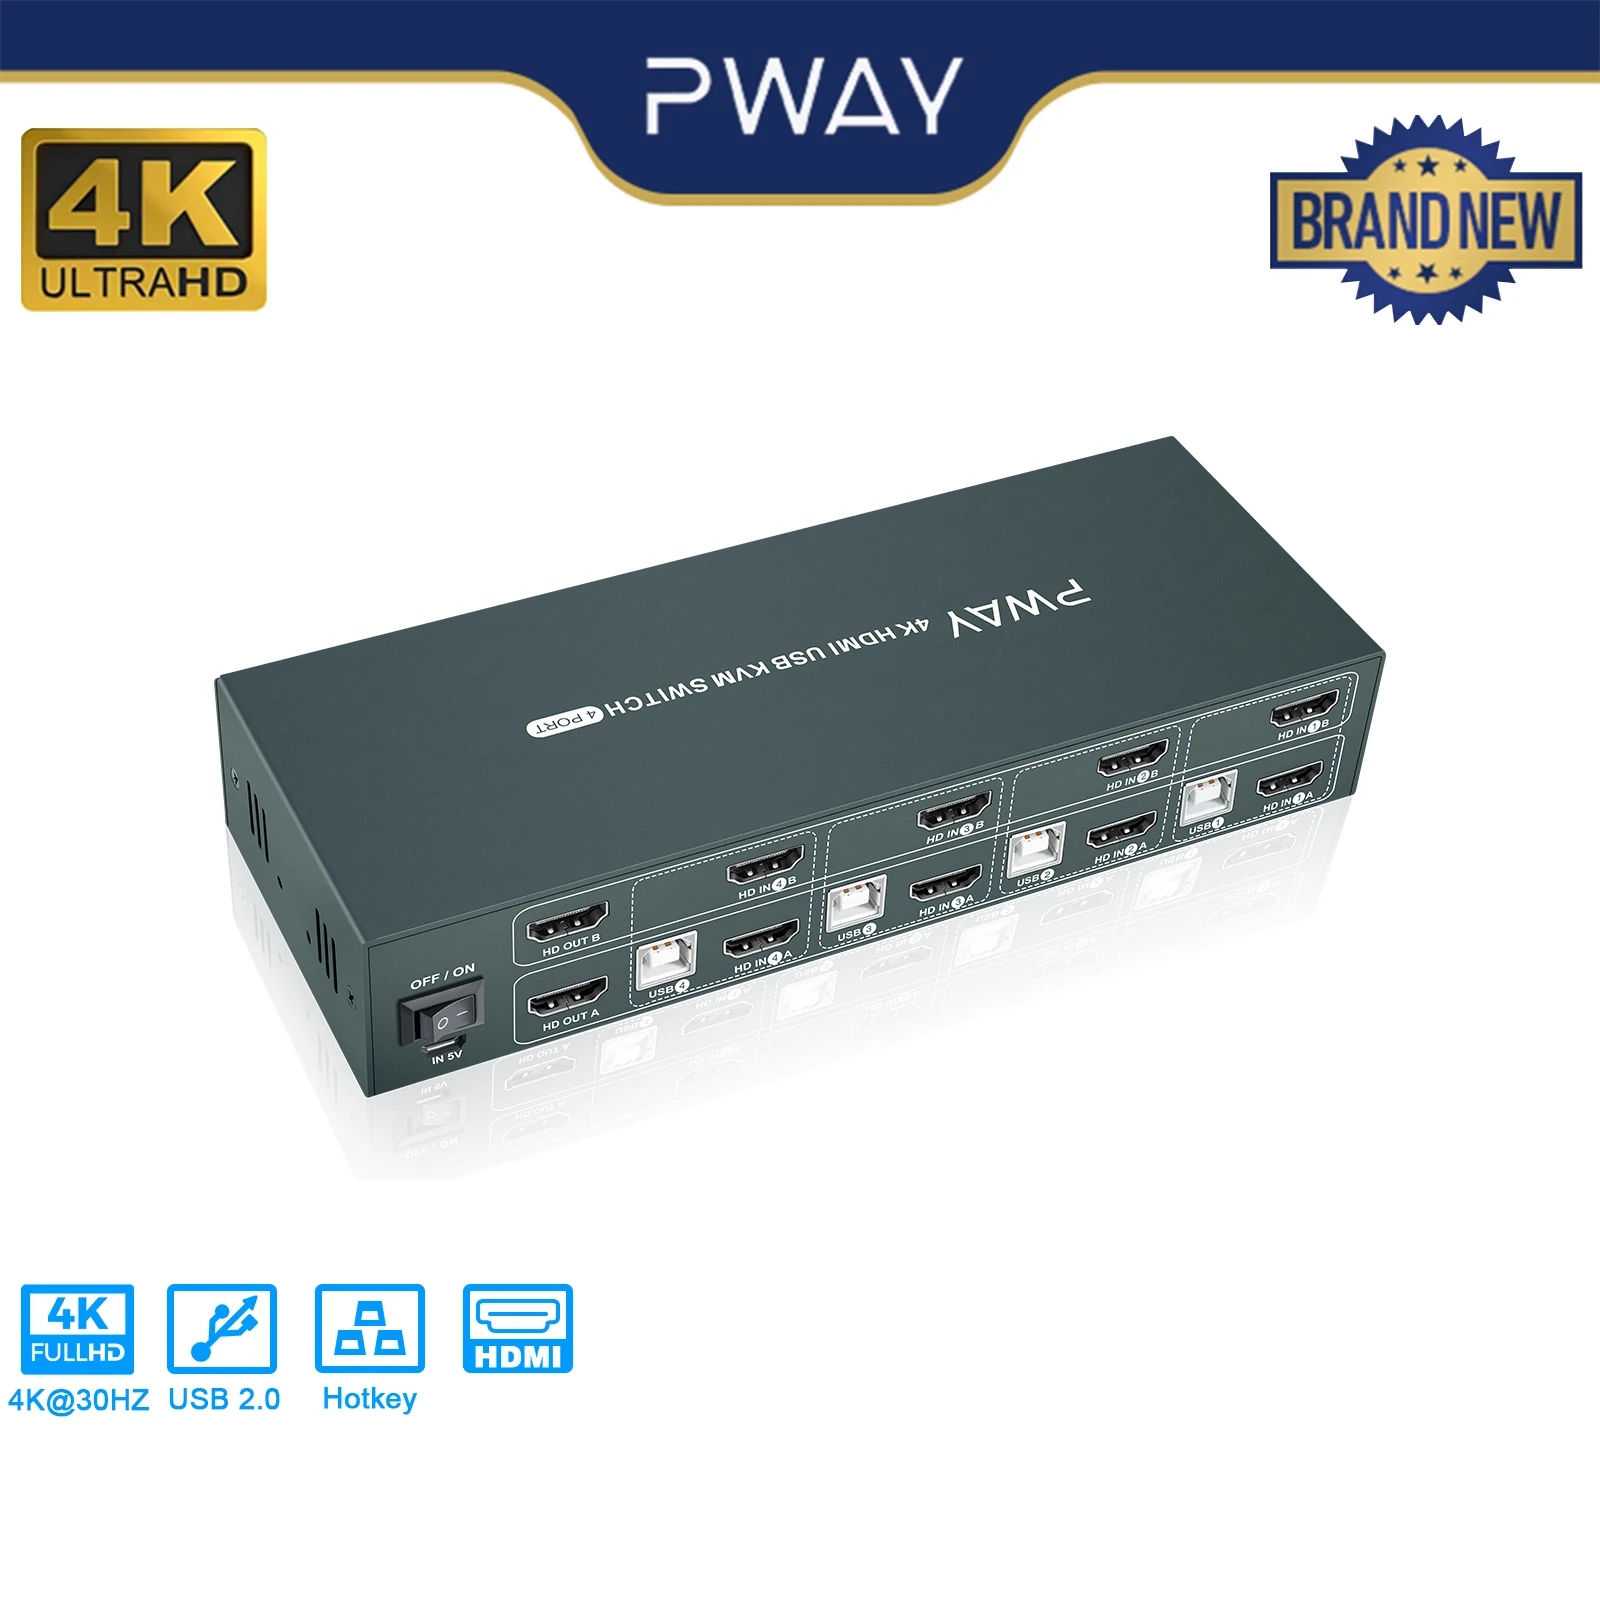 PWAY KVM Switch HDMI 4 In 2 Out Support Resolution 4K@30Hz Four USB2.0 Keyboard And Mouse Printer Switch For PC Laptop